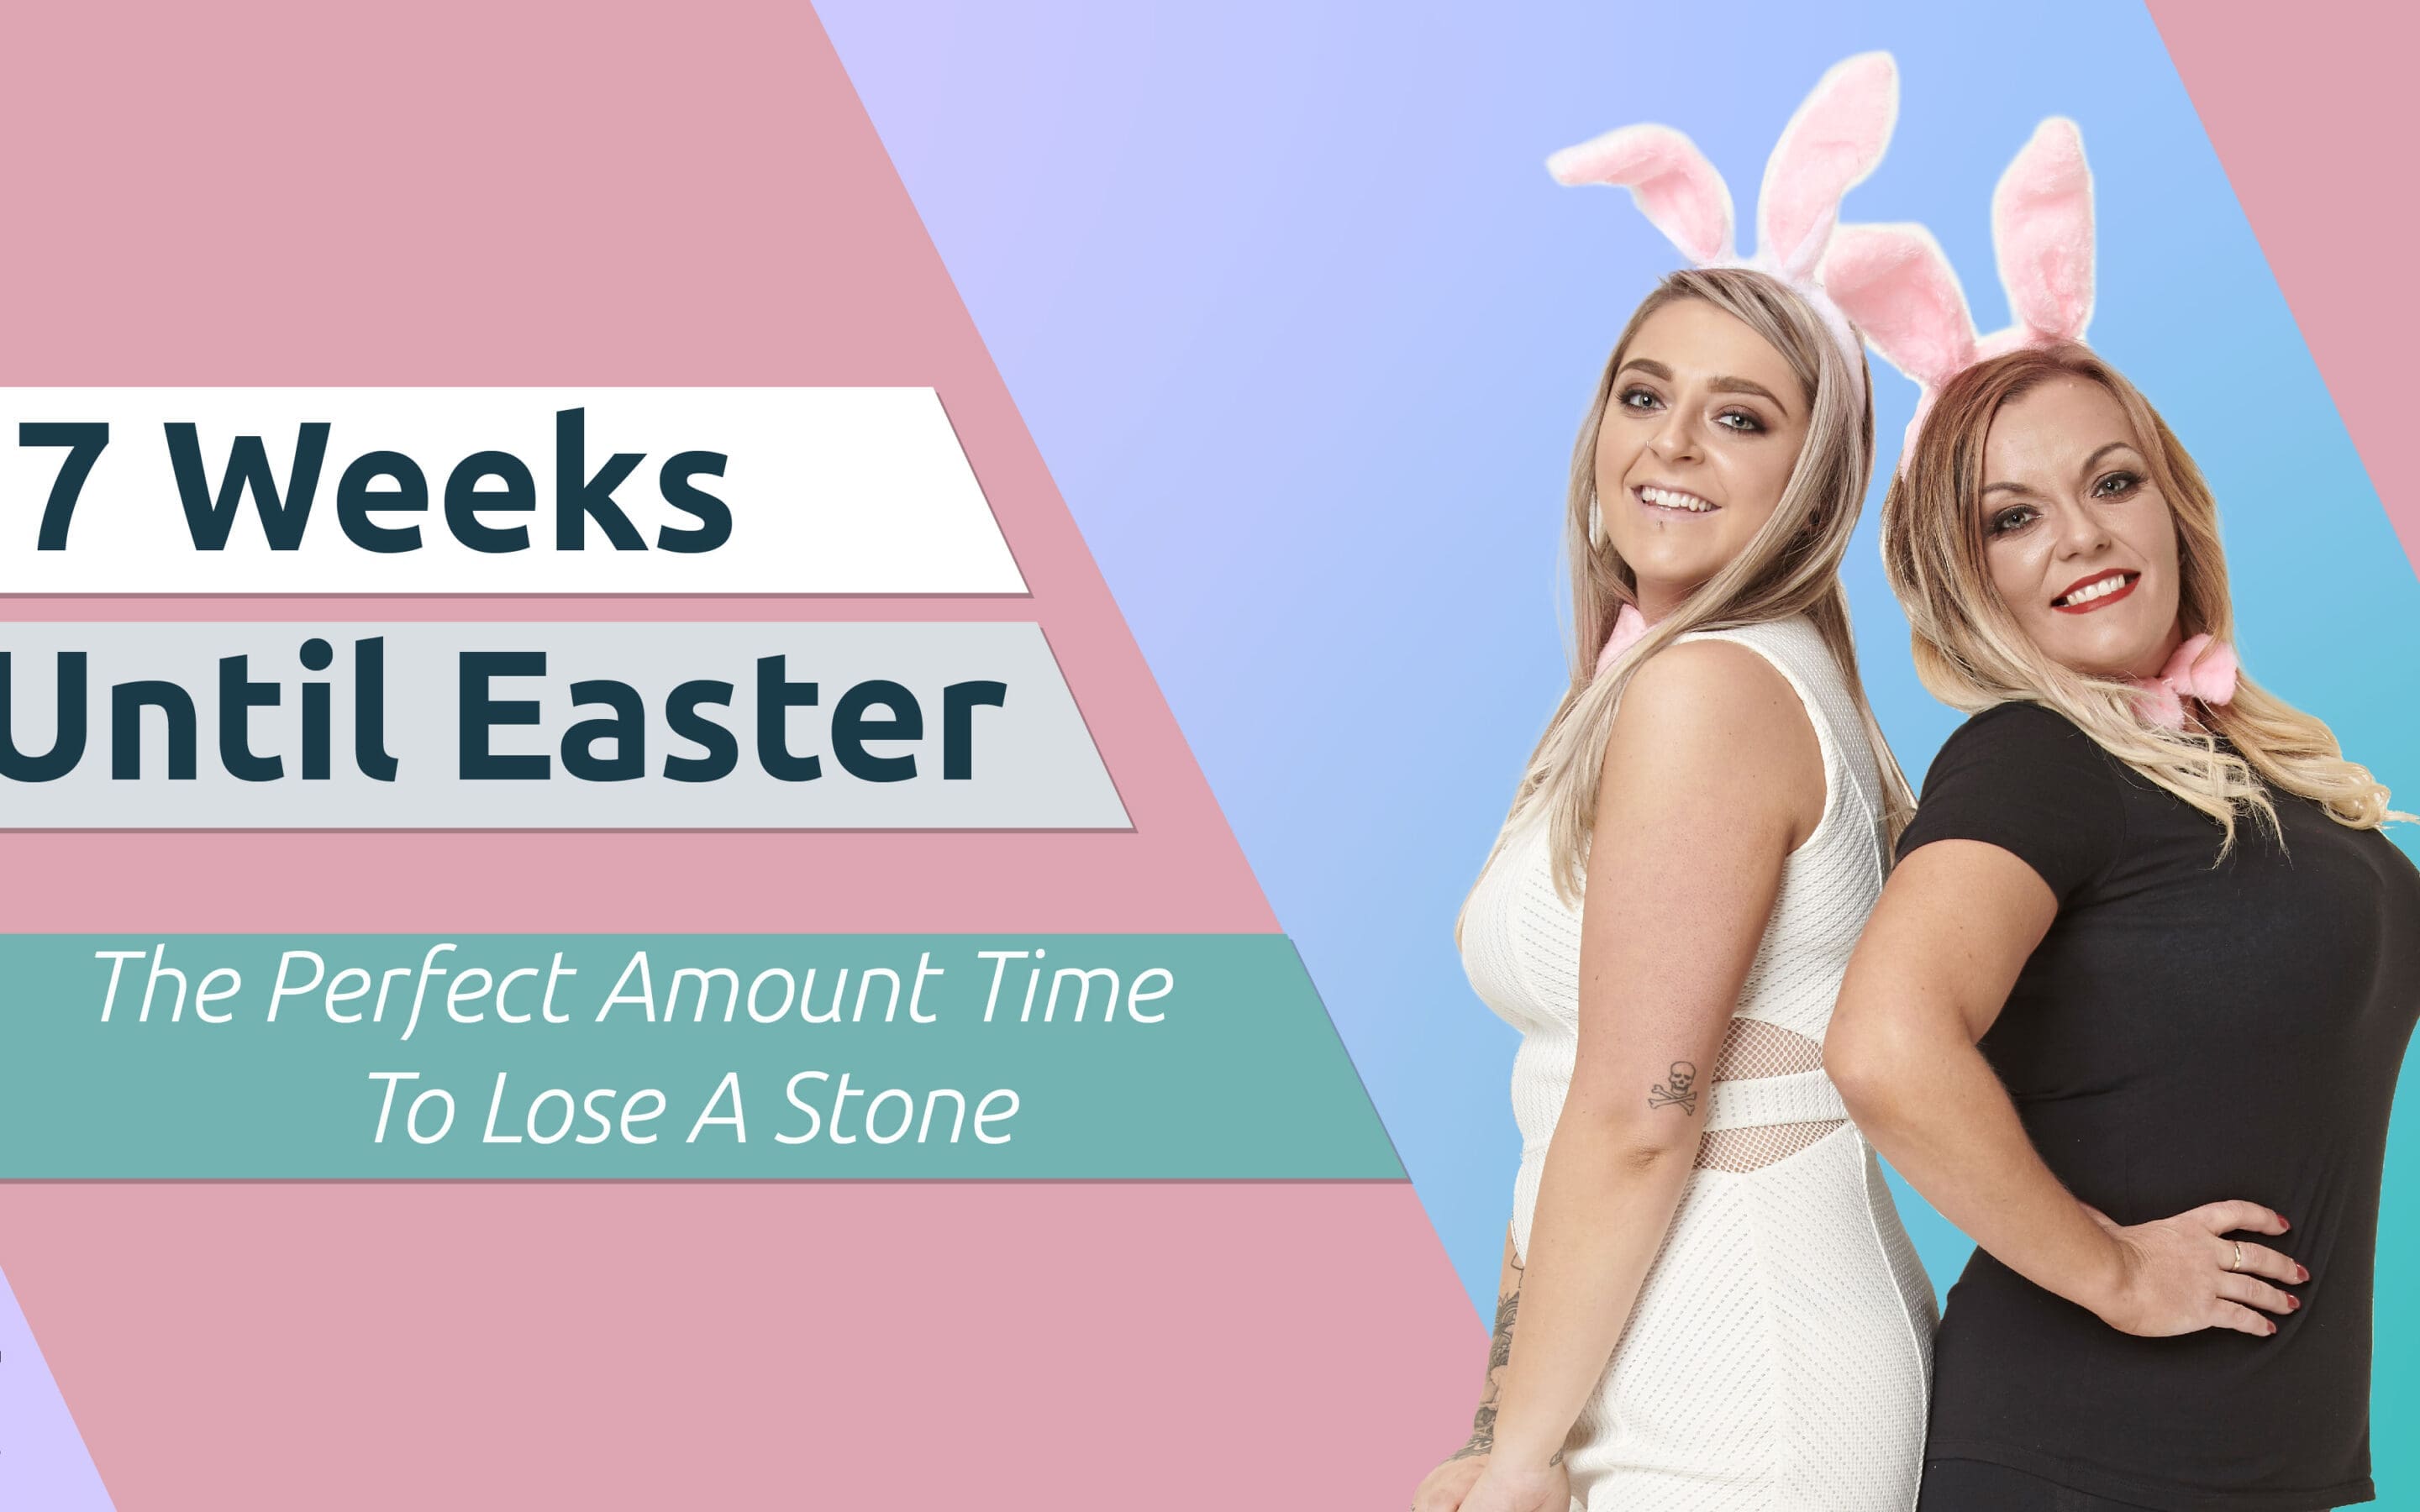 7 Weeks Until Easter – The Perfect Amount Time To Lose A Stone